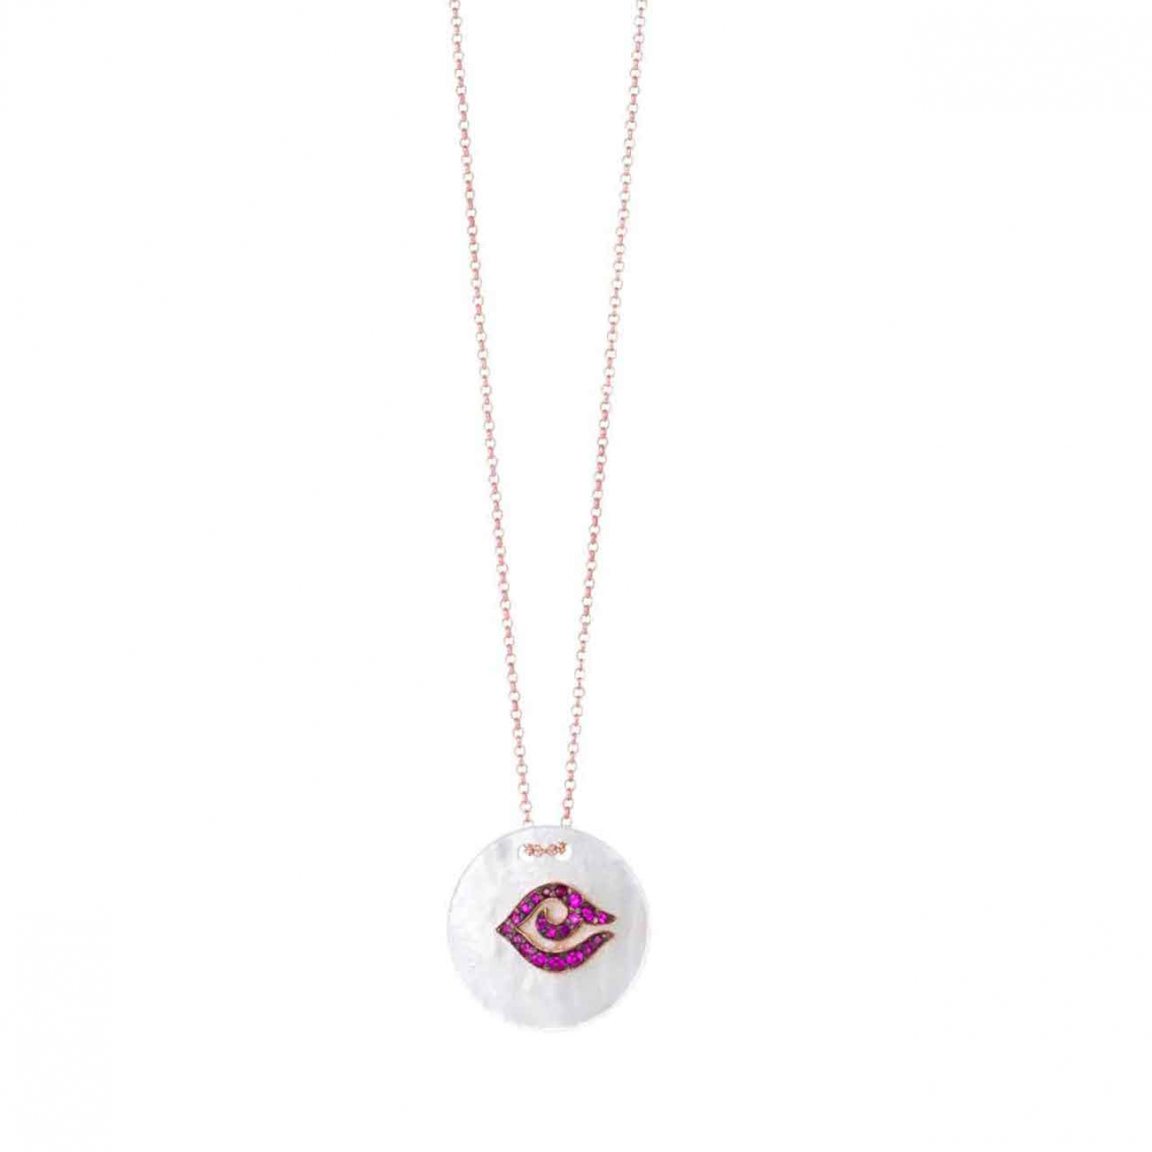 Mother of pearl necklace with fuchsia eye